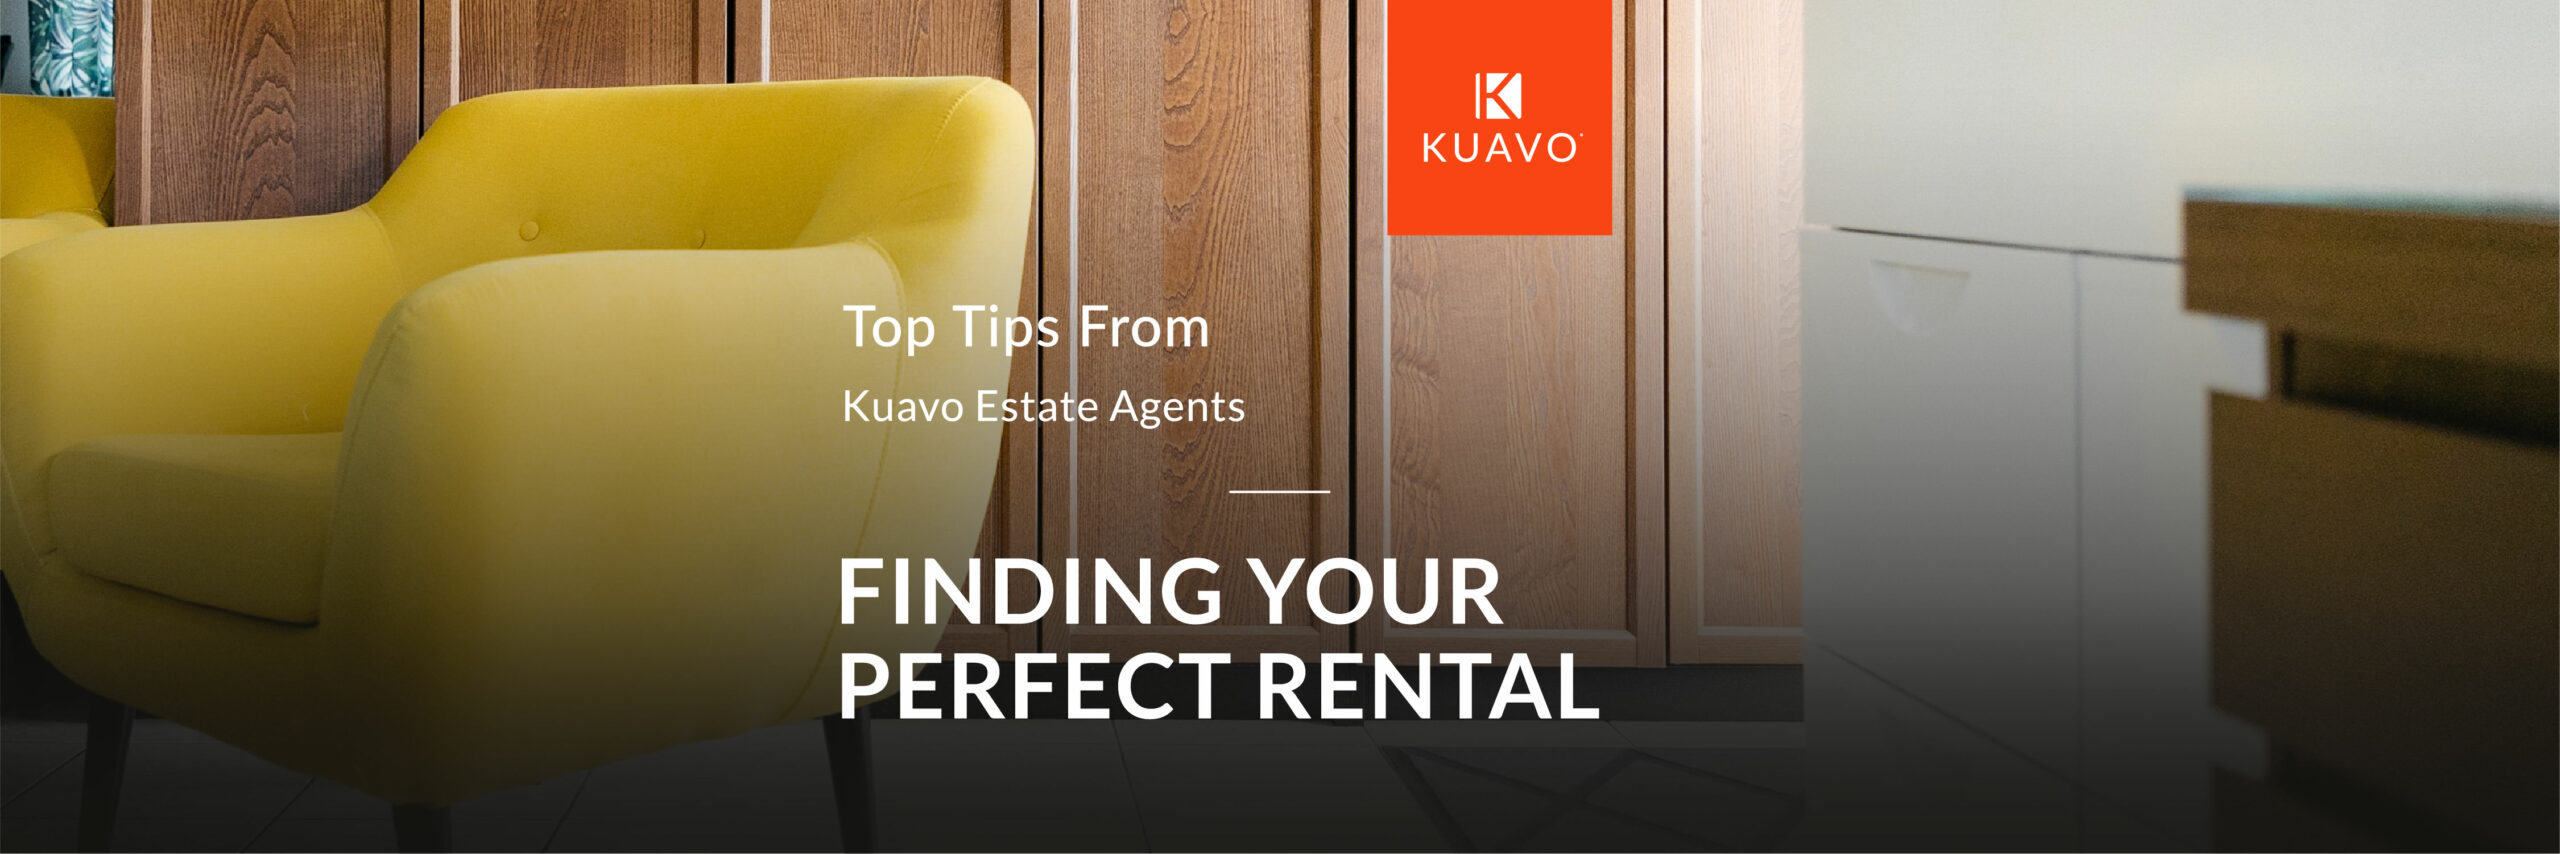 Finding Your Perfect Rental | Top Tips From Kuavo Estate Agents